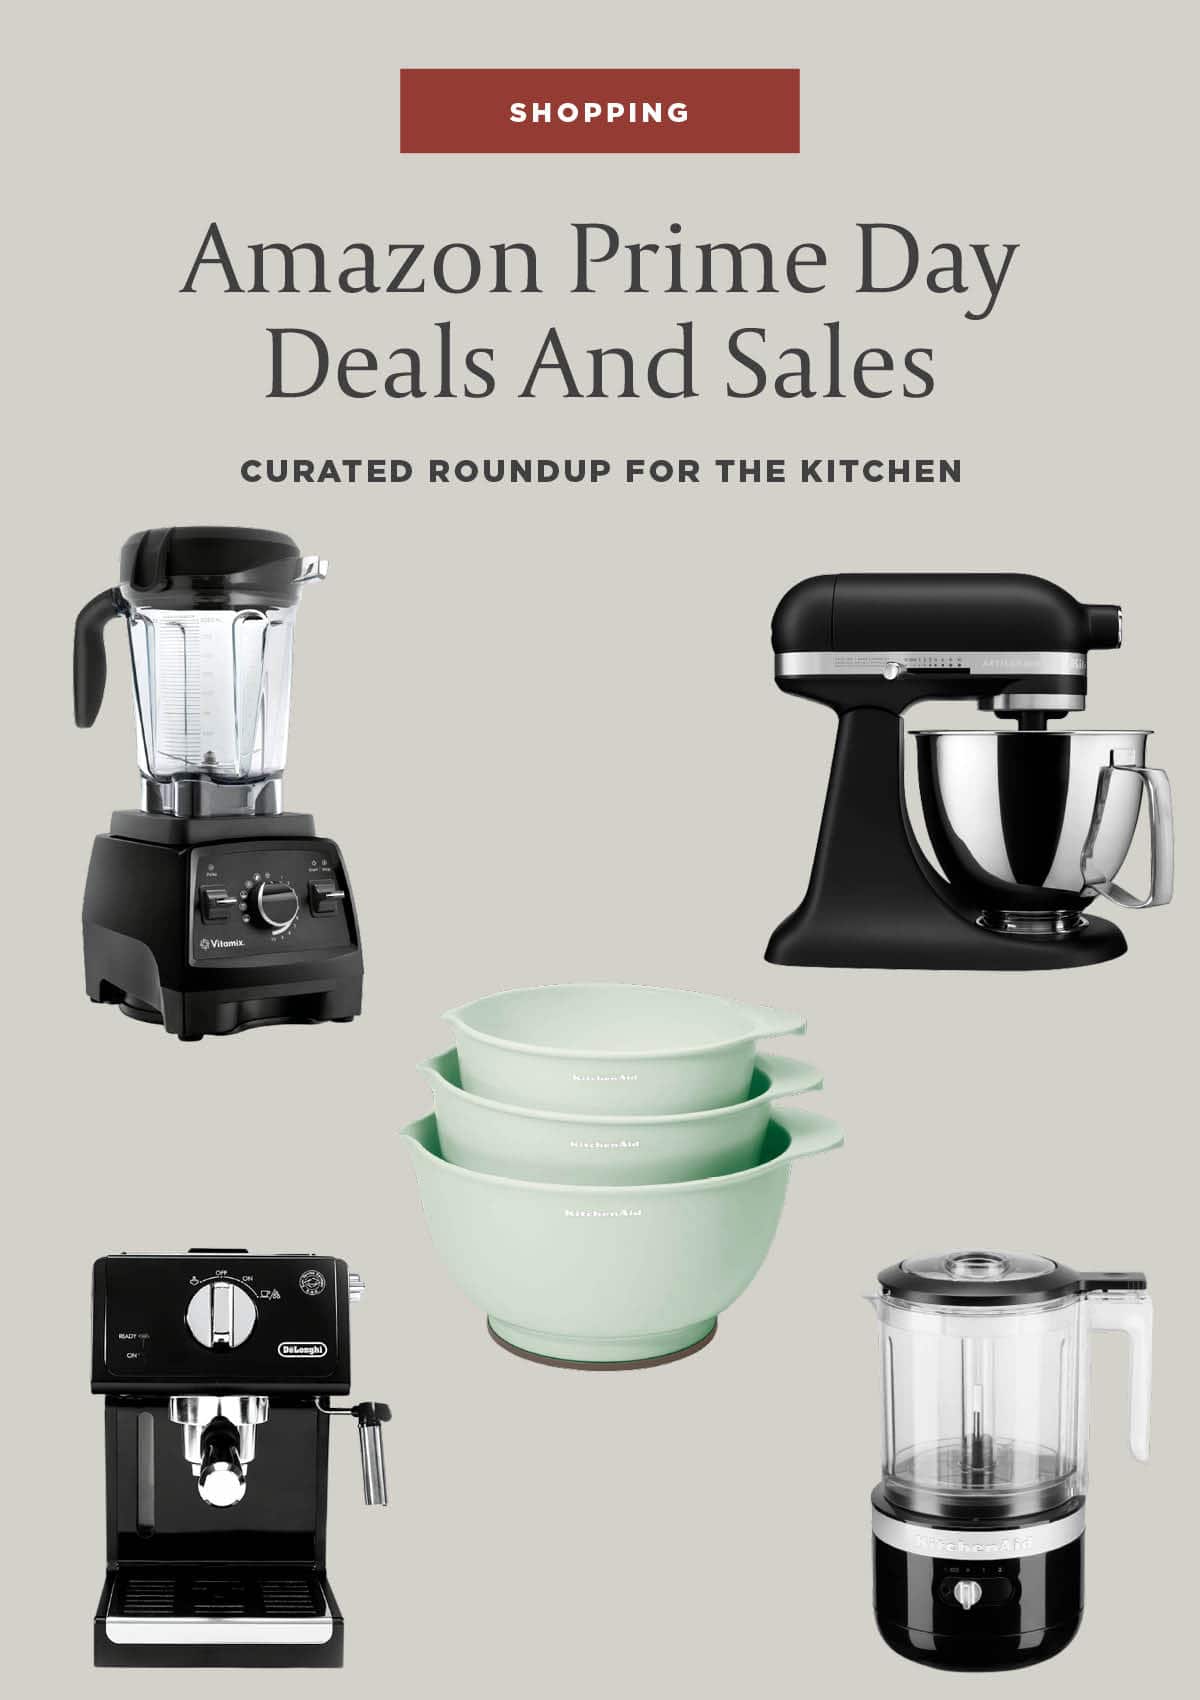 Amazon Prime Day deals - shop these small appliances for your kitchen on sale now